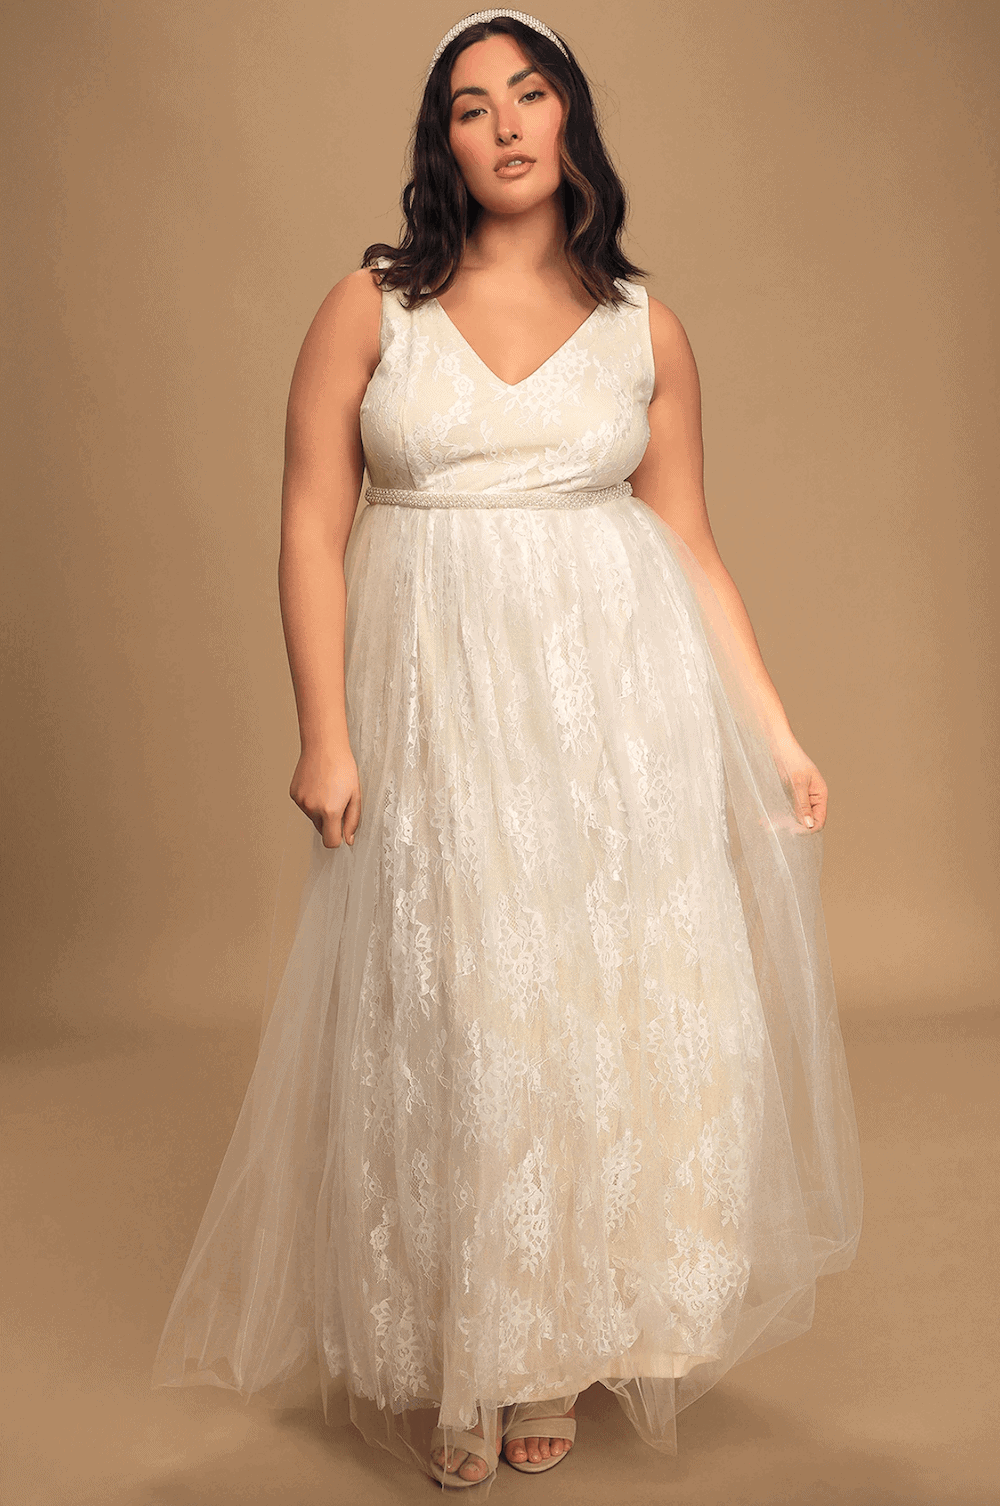 Plus Size Wedding Dresses with Sleeves Online Cheap Curvy Brides Lace Backless Dress Lulus